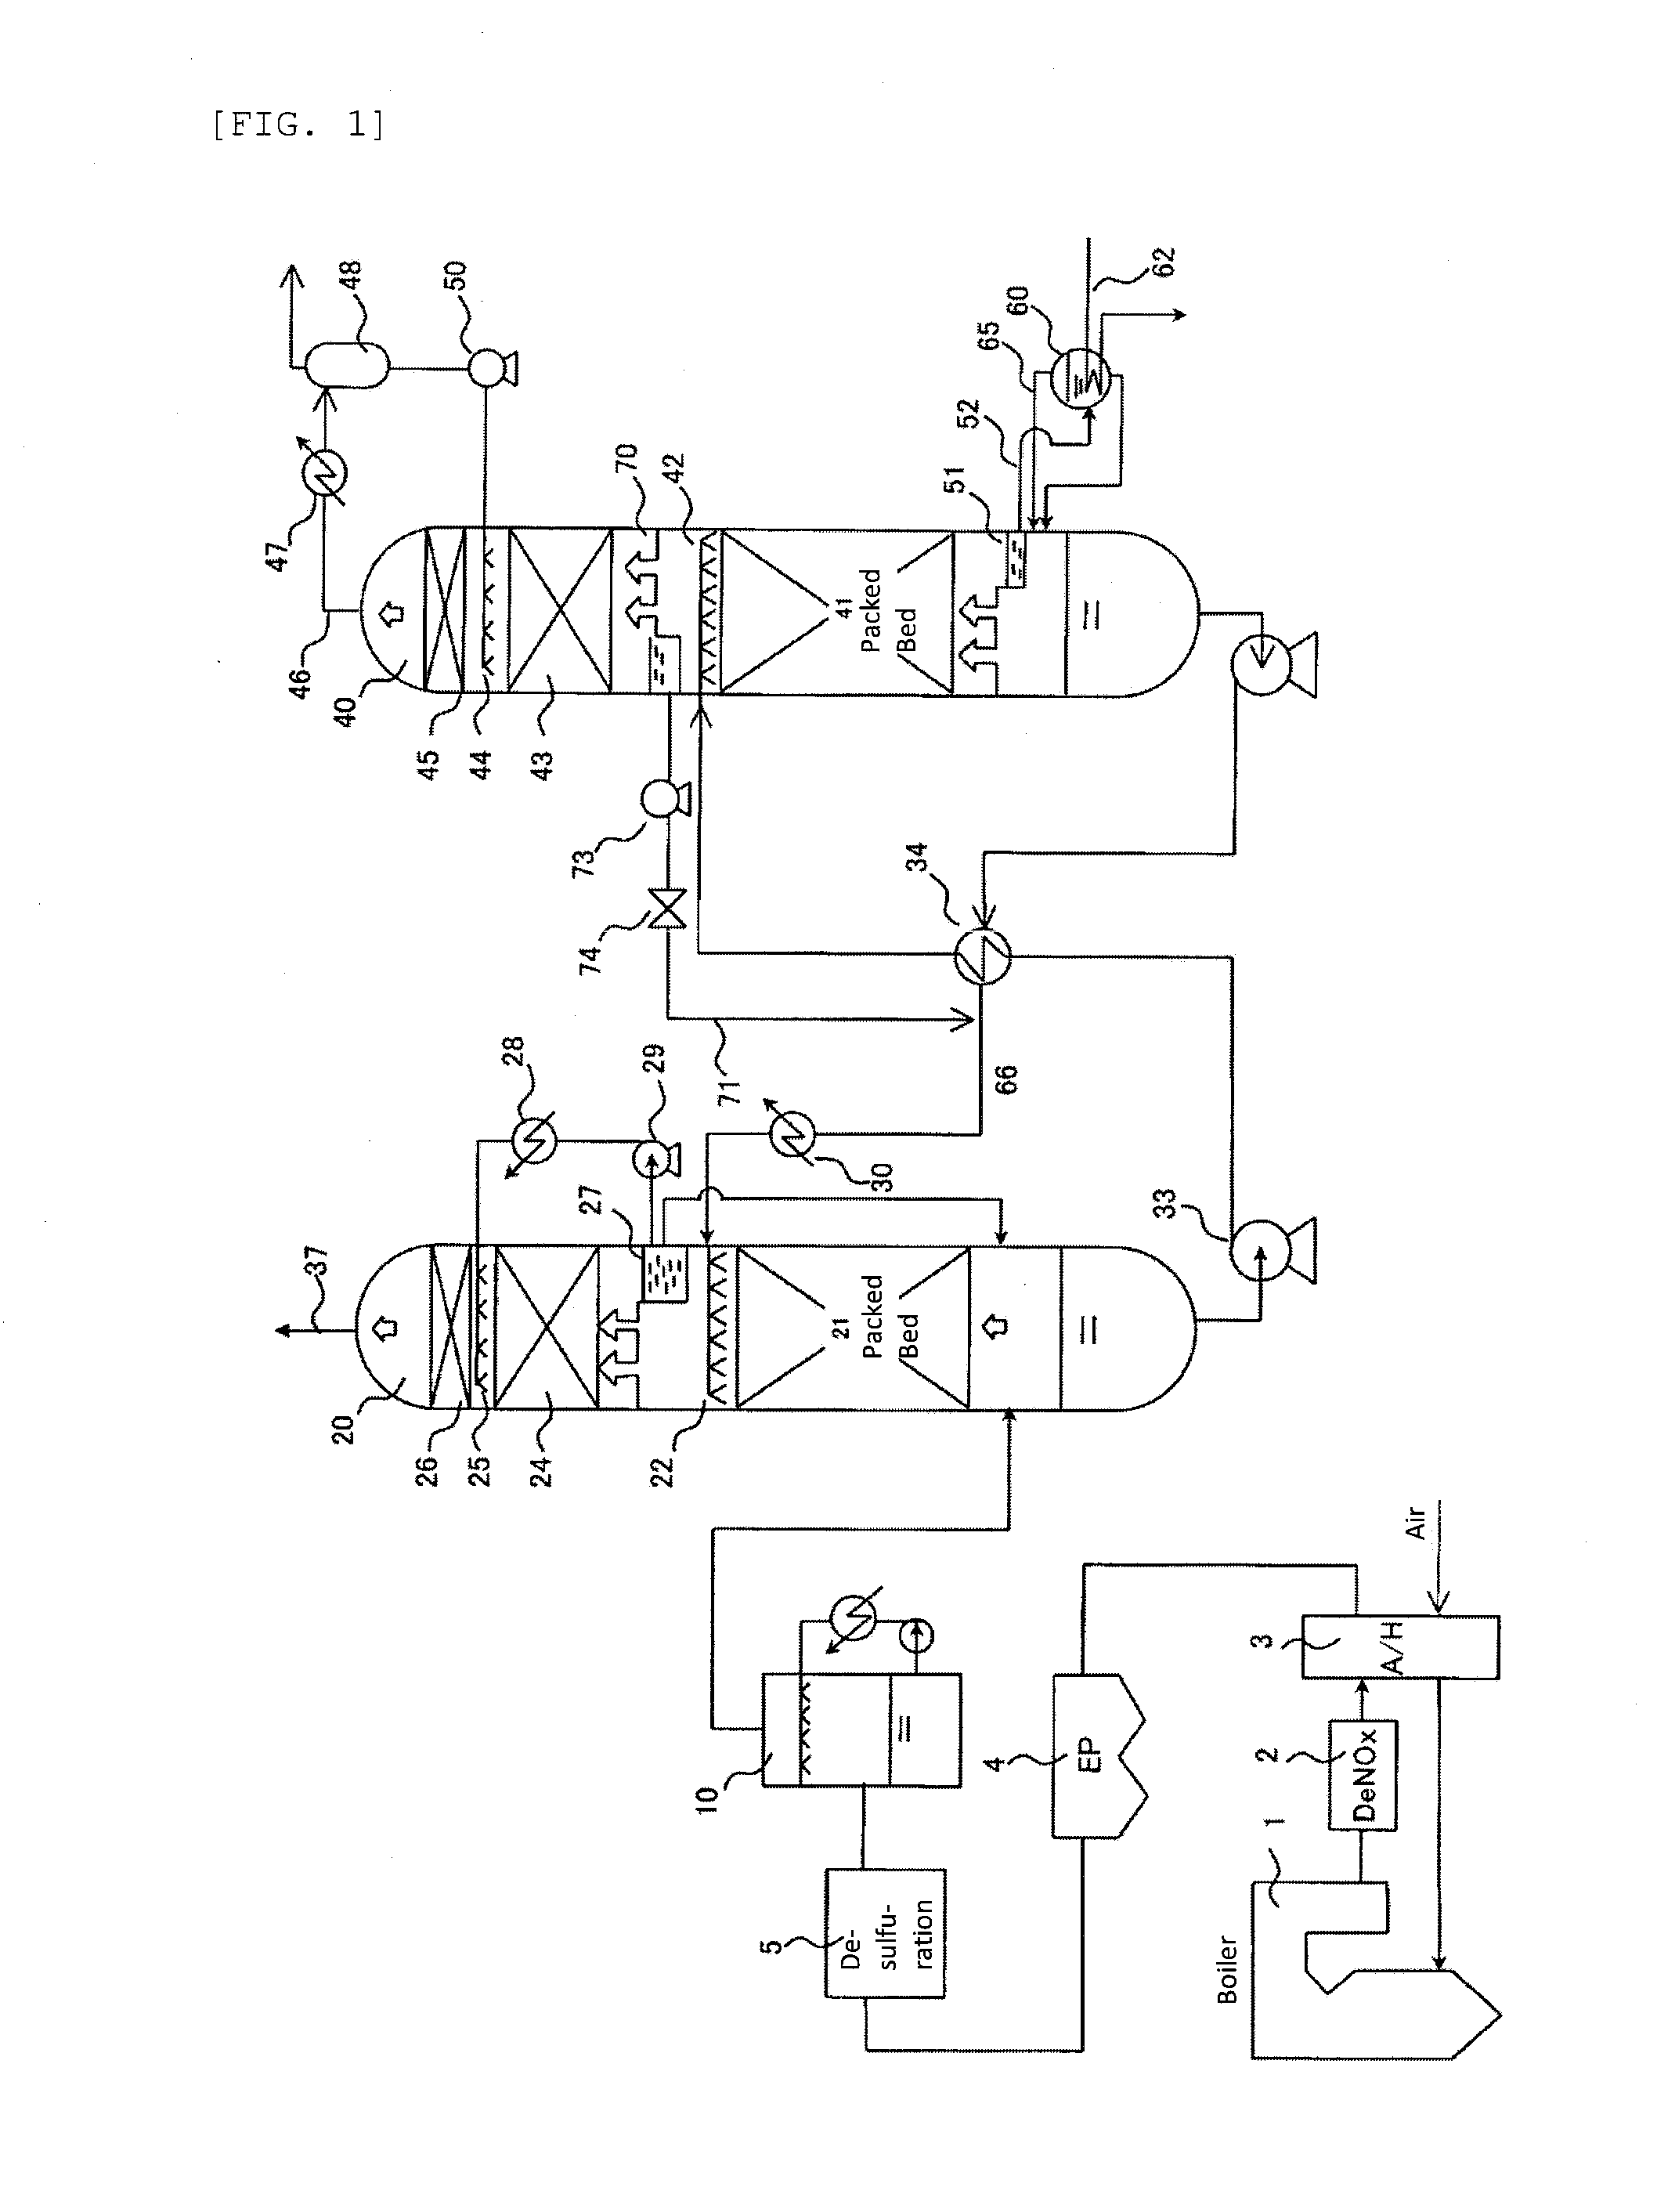 System for chemically absorbing carbon dioxide in combustion exhaust gas